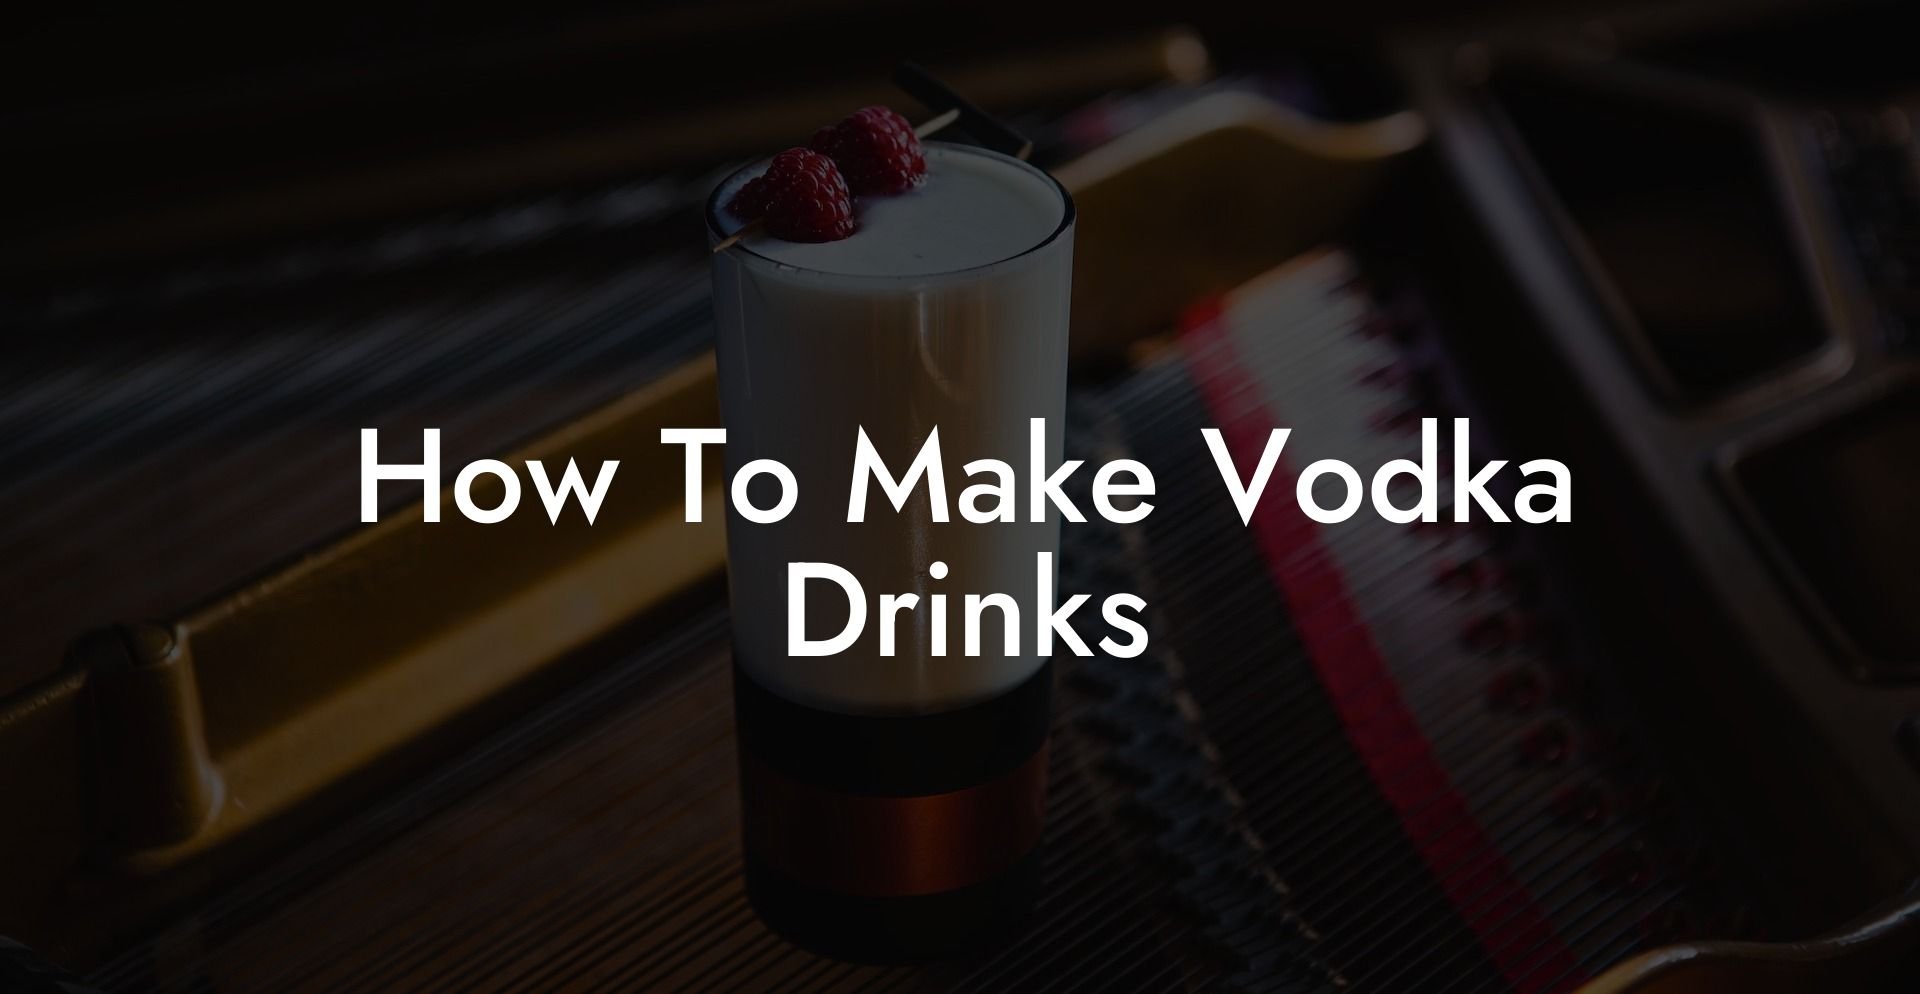 How To Make Vodka Drinks